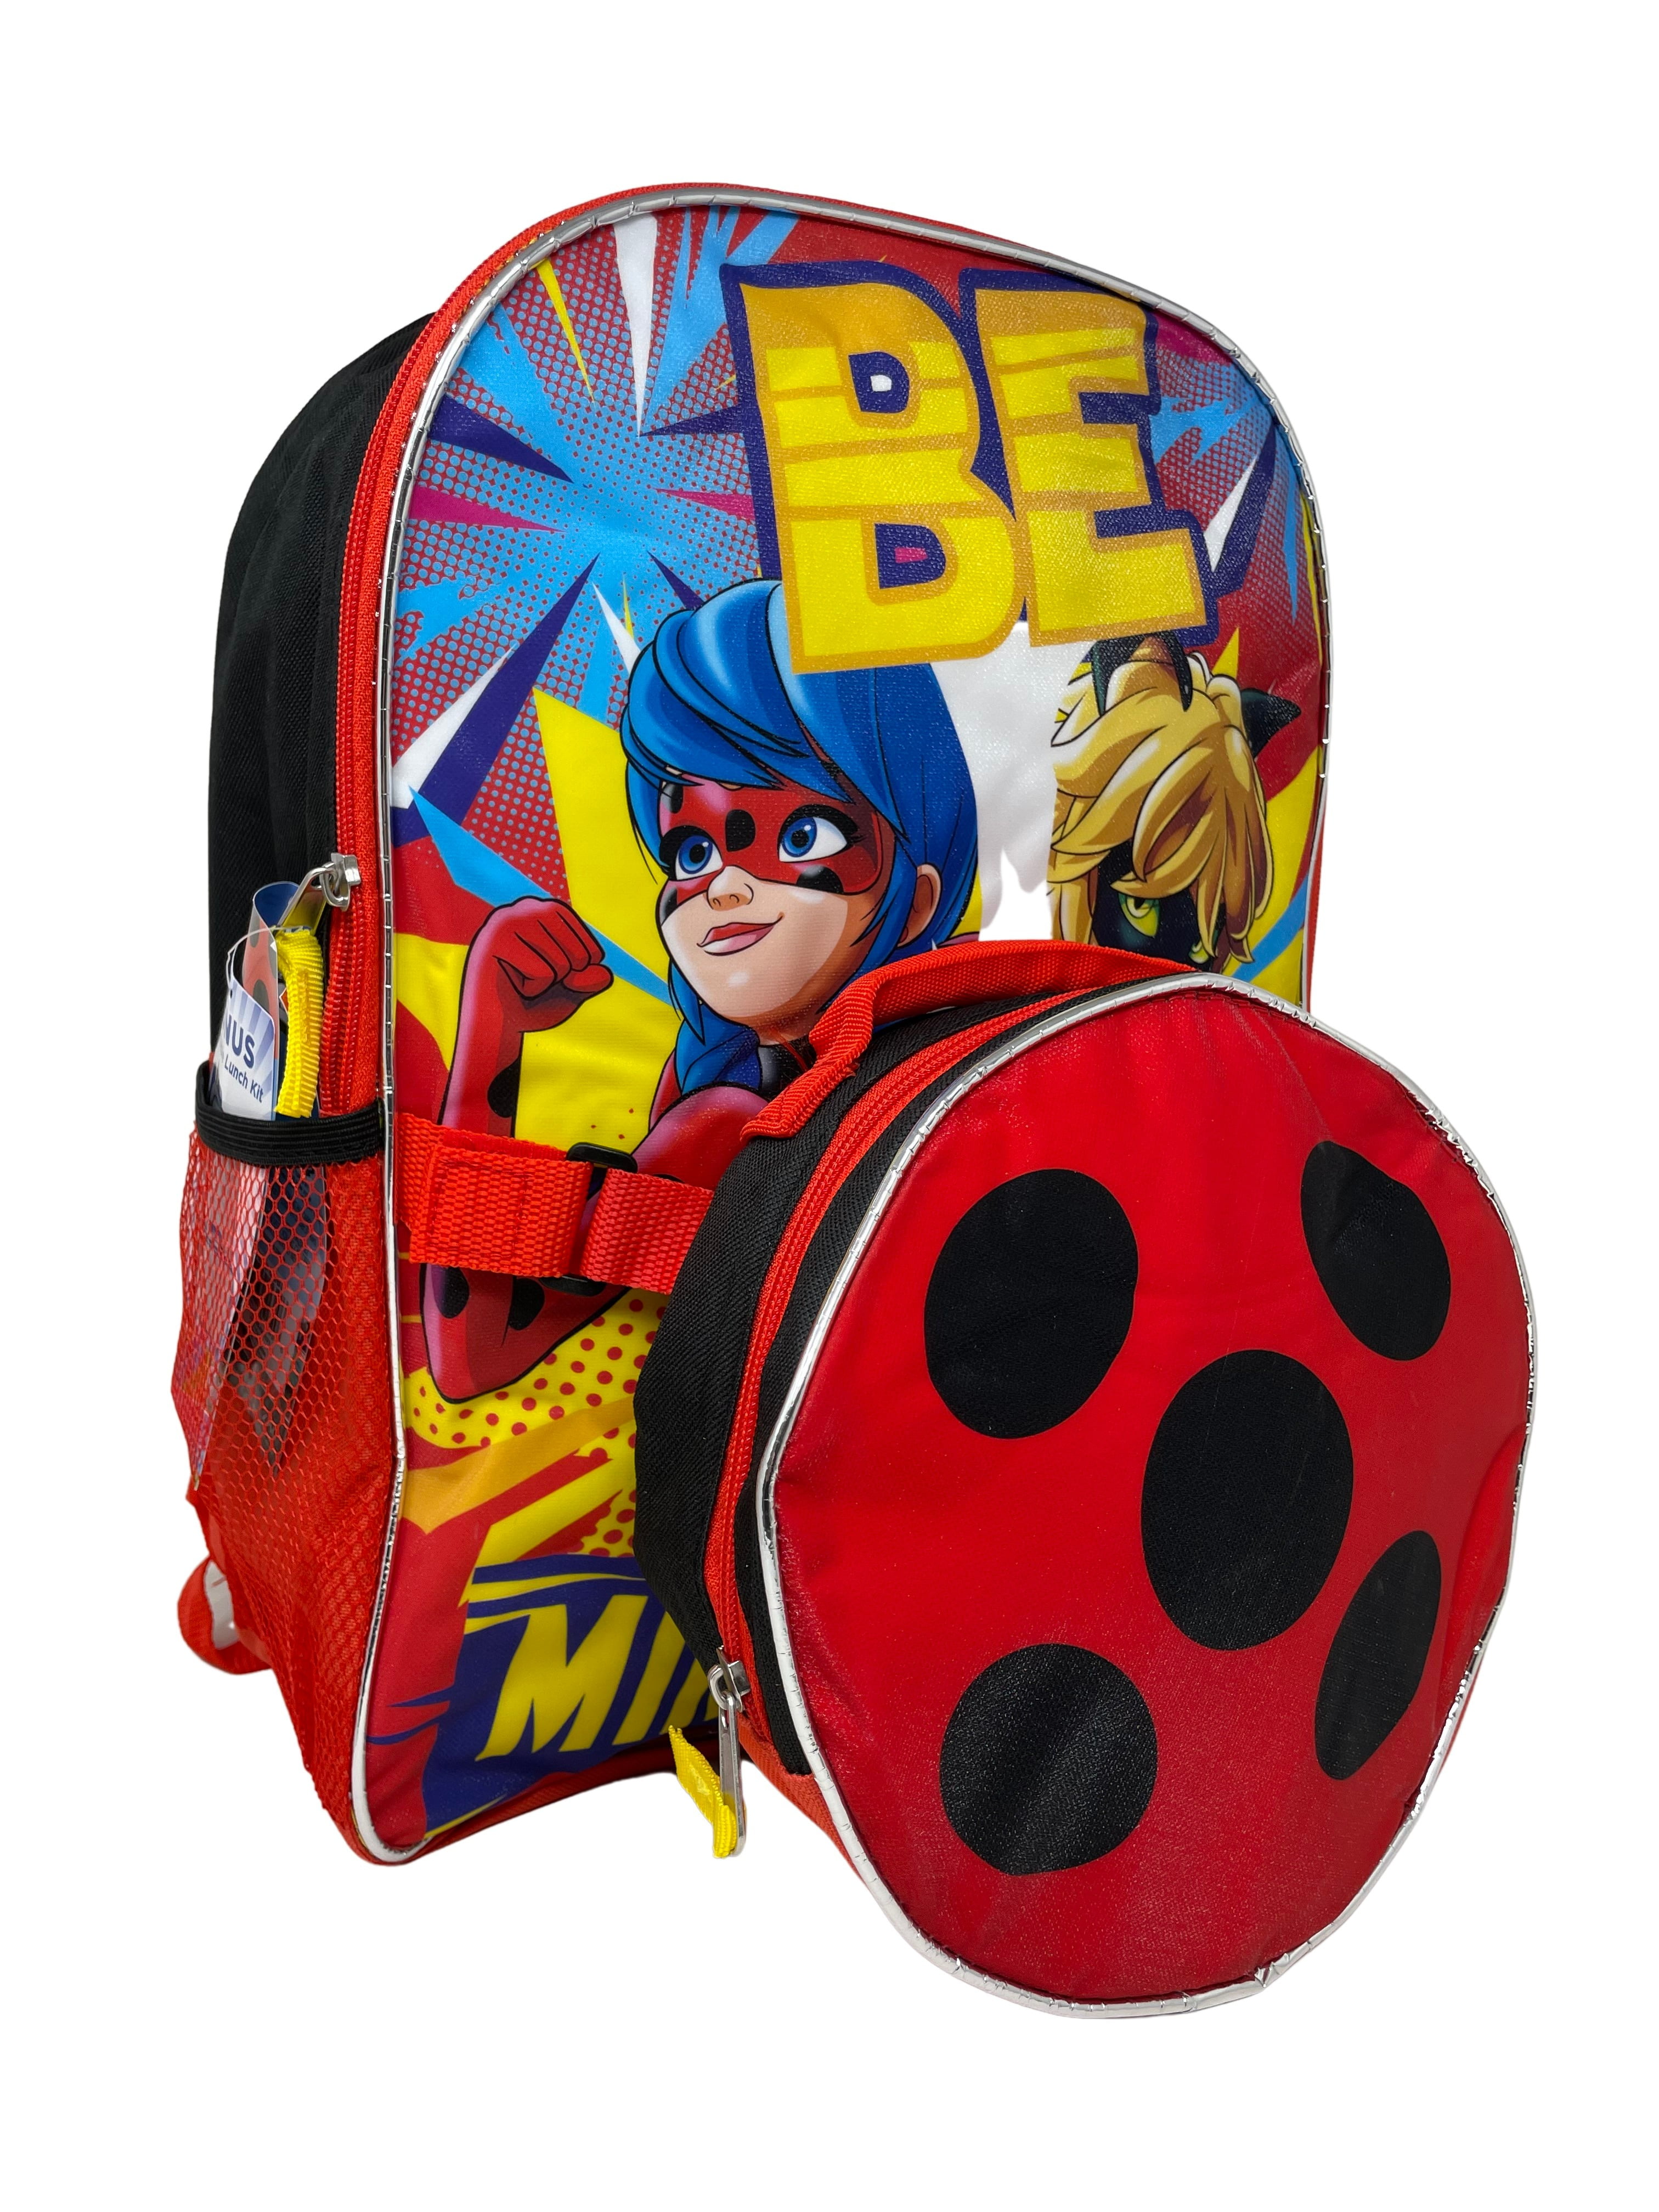 Buy Miraculous Ladybug Kids Backpack Lady Bug Online at Lowest Price Ever  in India | Check Reviews & Ratings - Shop The World